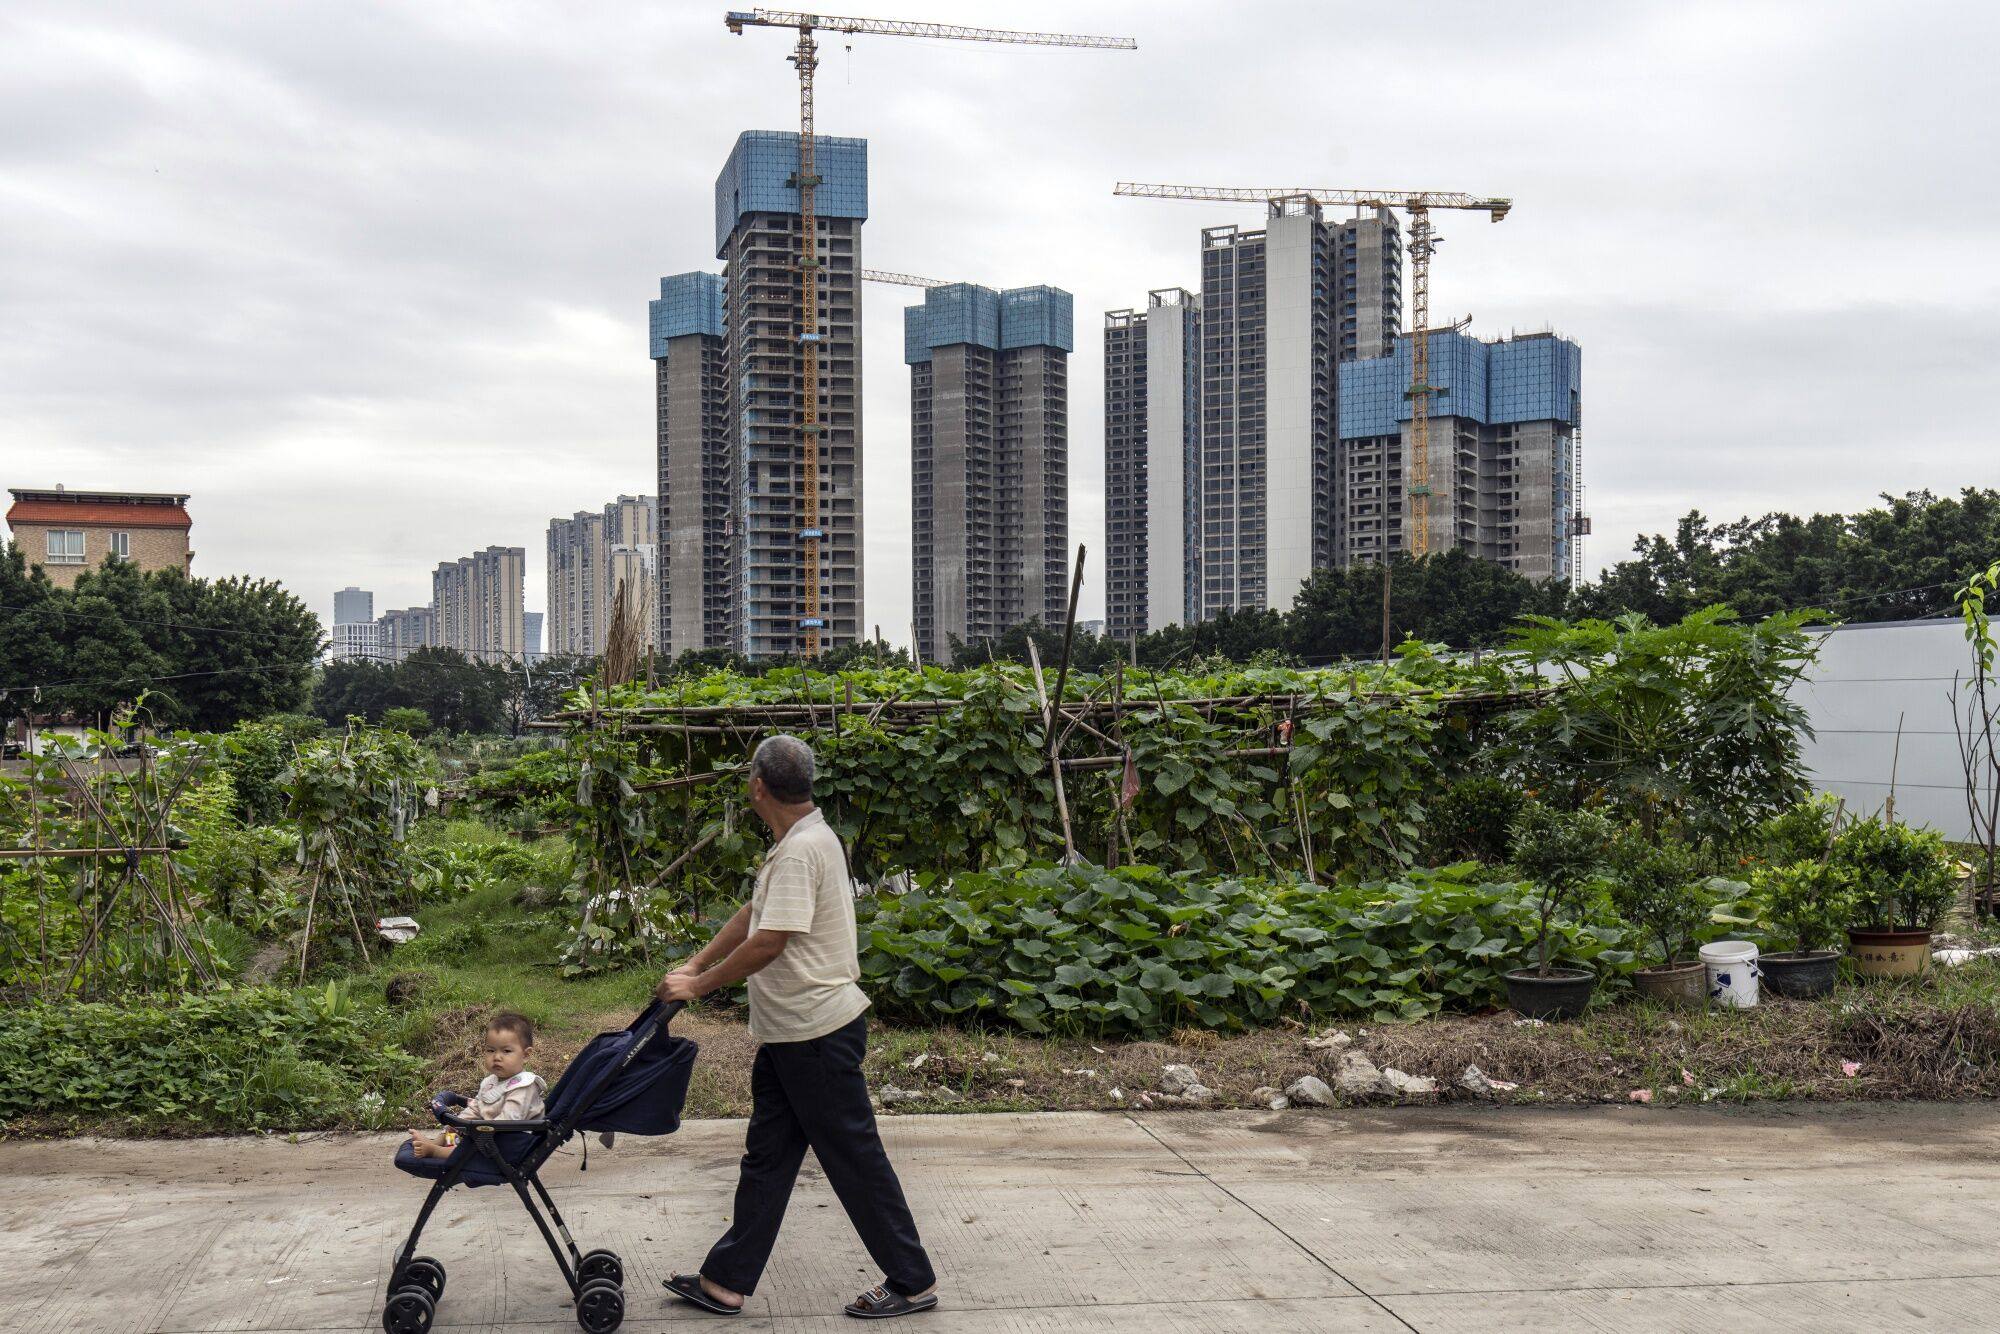 A pedestrian wheels a baby past residential buildings under construction at Country Garden’s Century Centre development in Foshan, Guangdong province, on May 22. The central government has taken several measures to ease the crisis in China’s property market, generating an upsurge in sentiment around Chinese stocks. Photo: Bloomberg